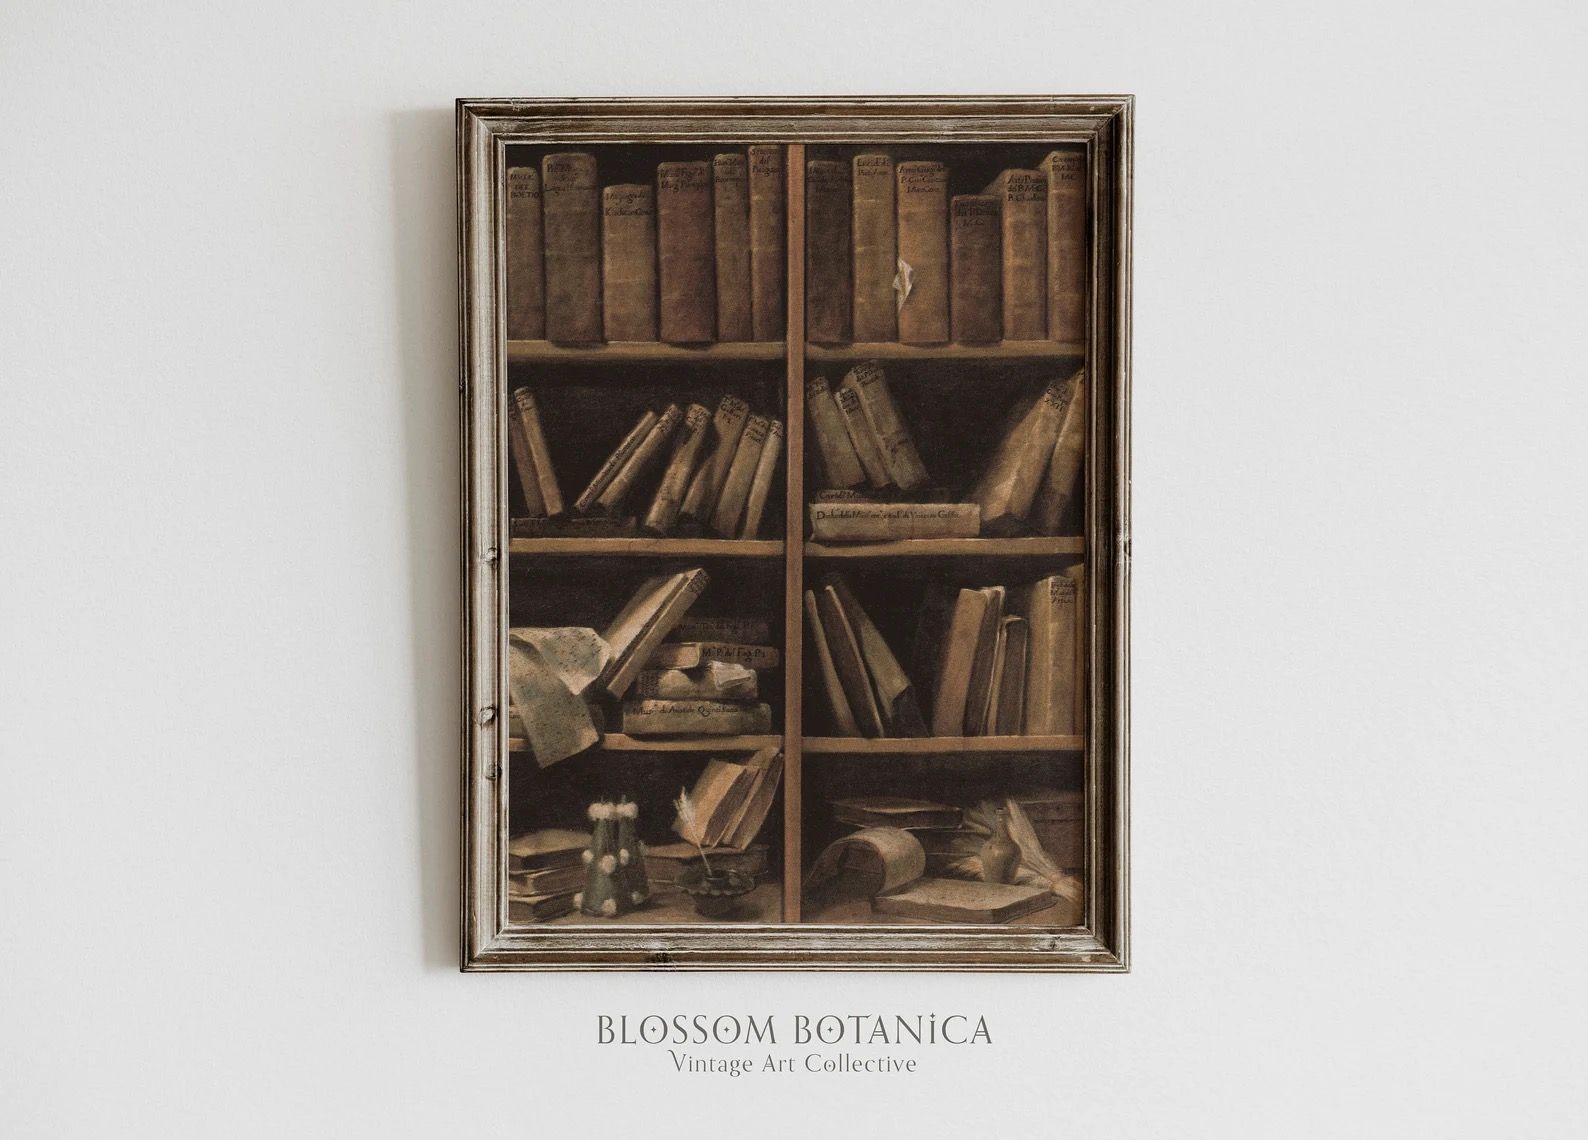 vintage art print showing old books arranged in eight pickets of a bookshelf